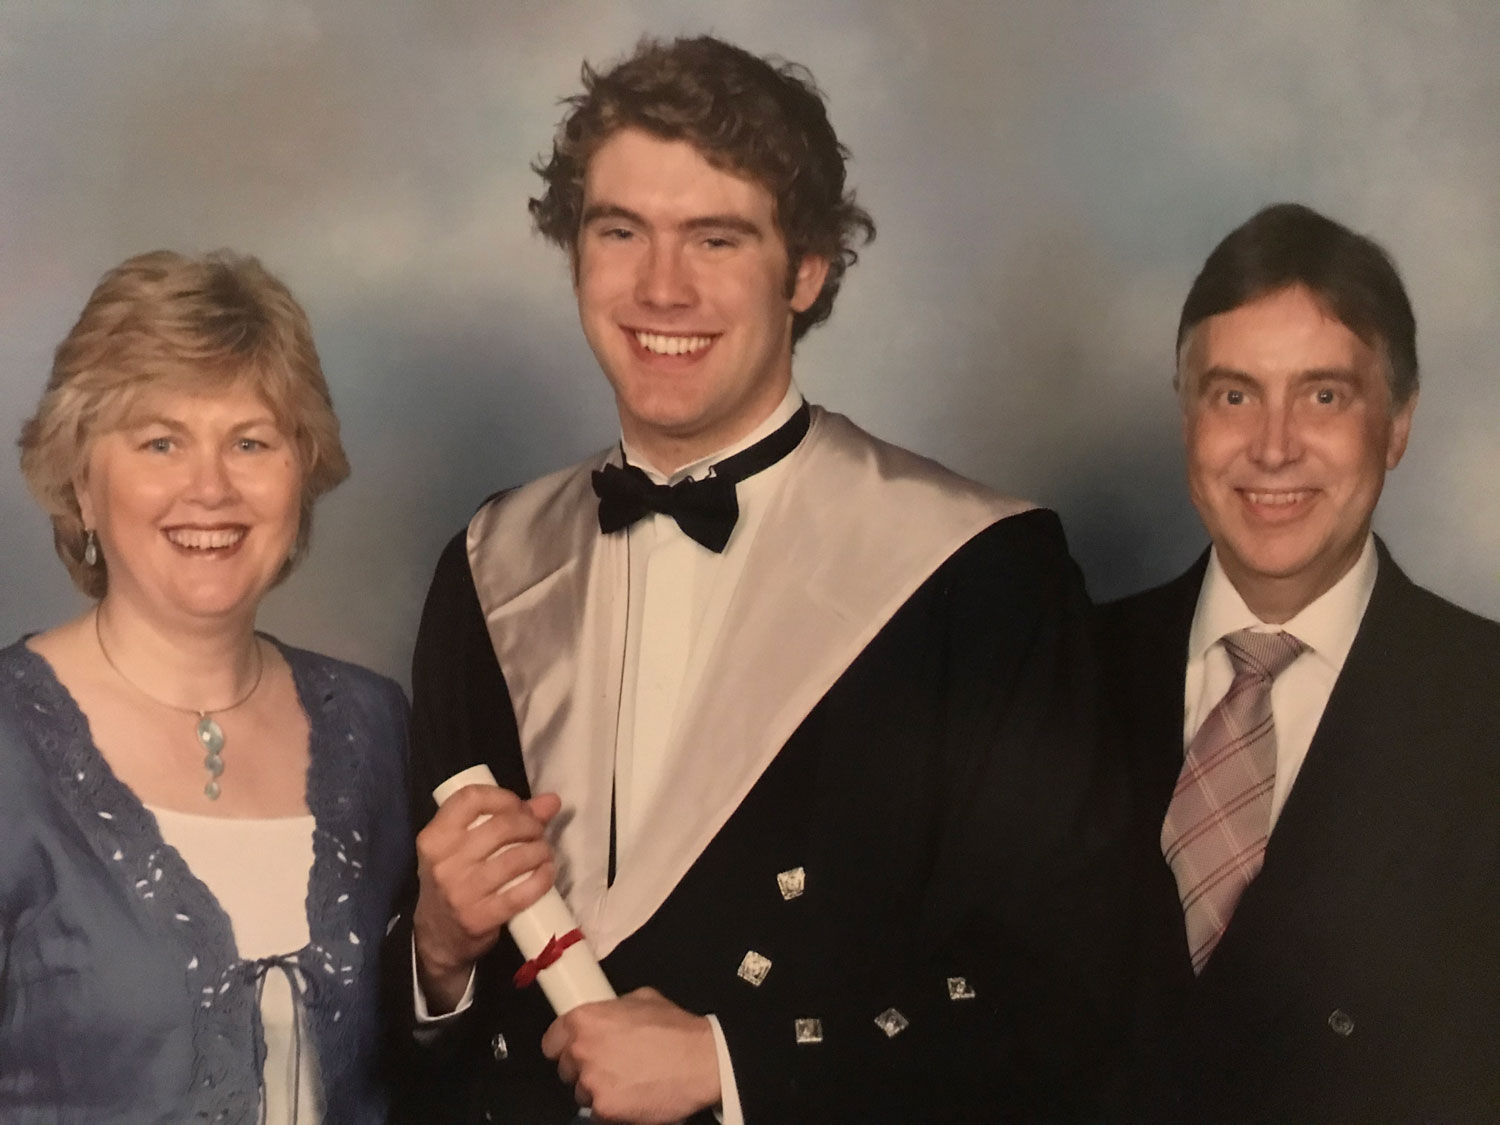 A photo of Adam and his parents at graduation